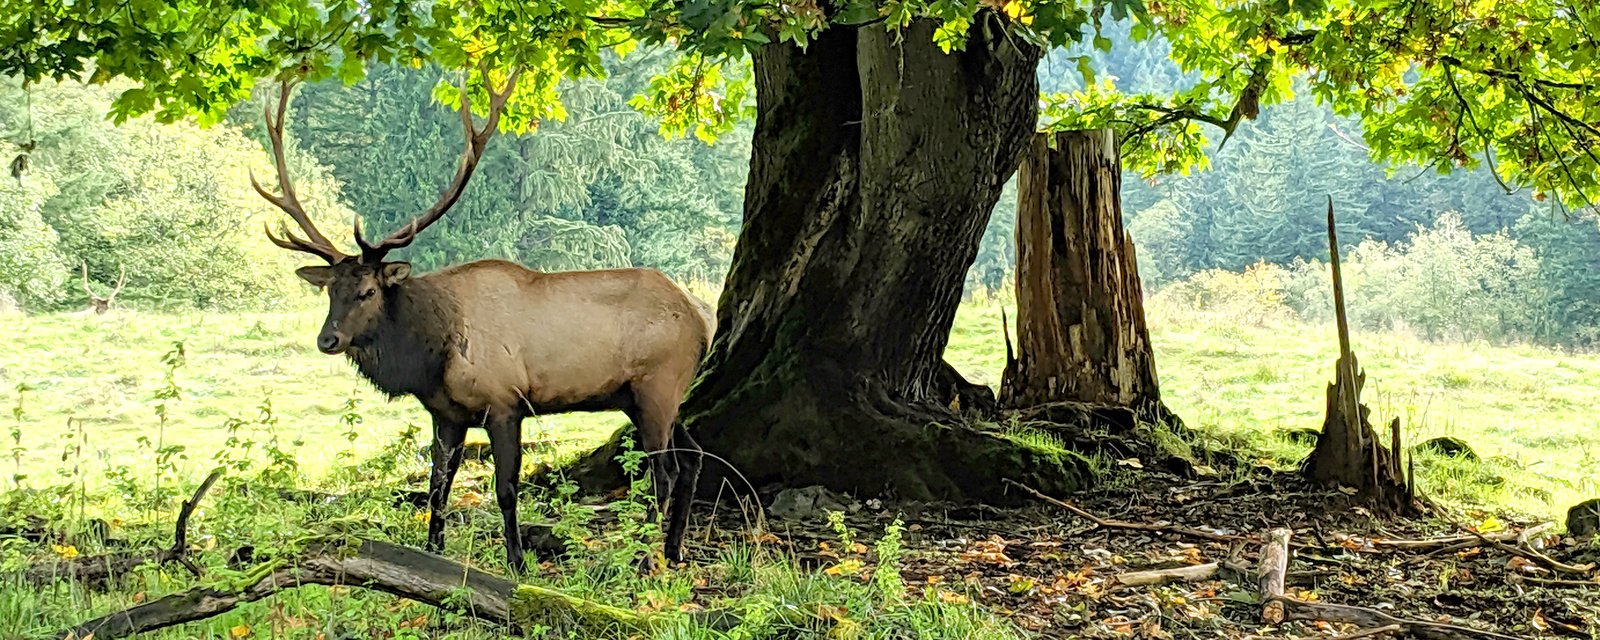 A deer rests under a tree. There's a mysterious shape visible between the two tree trunks.